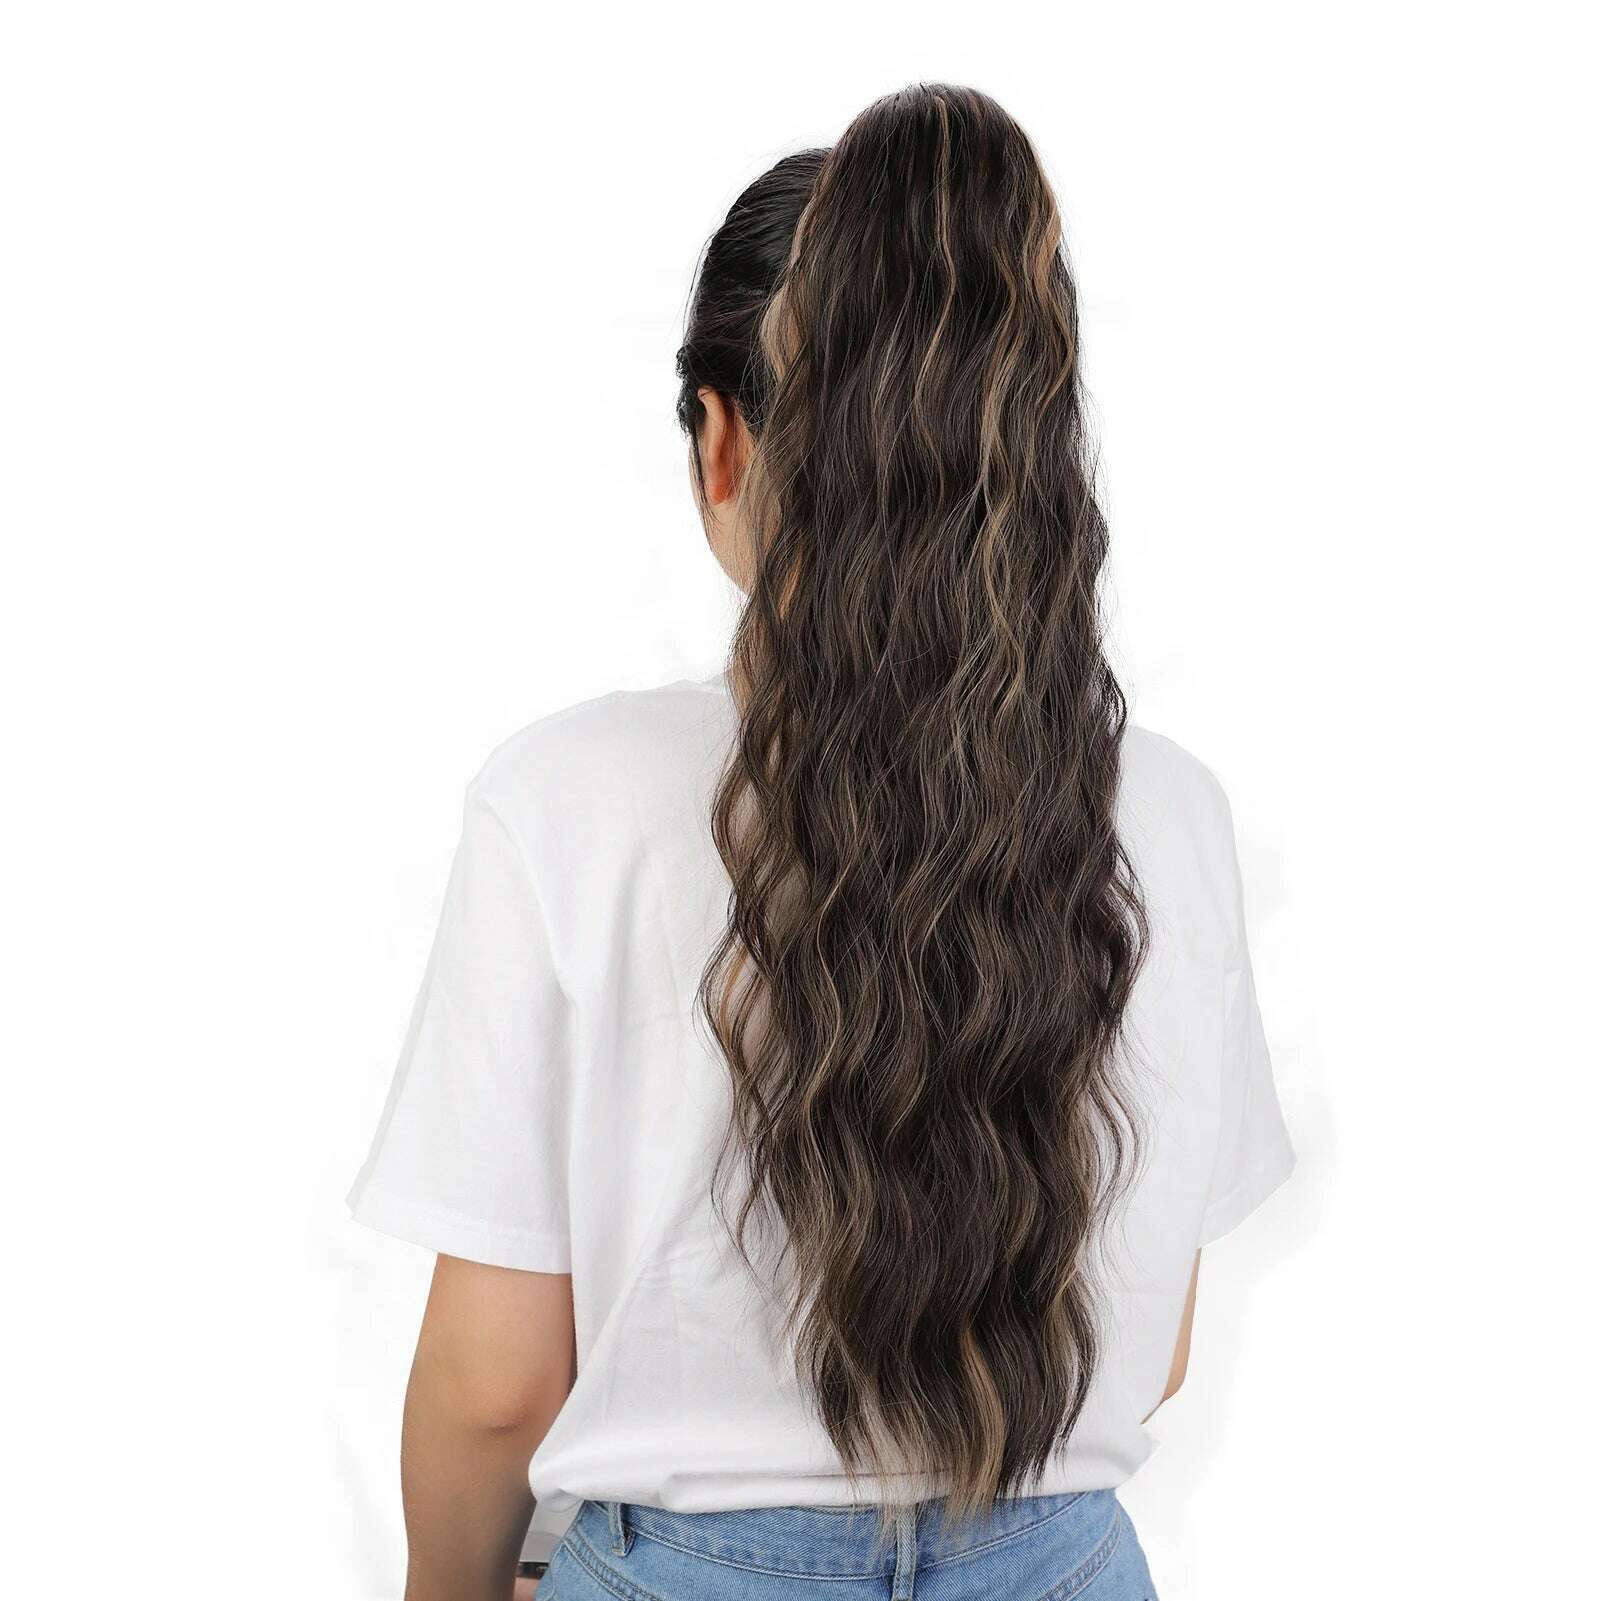 KIMLUD, I's a wig Synthetic Long natural wave hair extensions for women Wrap Around Clip In Ponytail Hair Extension Heat Reistan, PT142-6-22, KIMLUD Women's Clothes